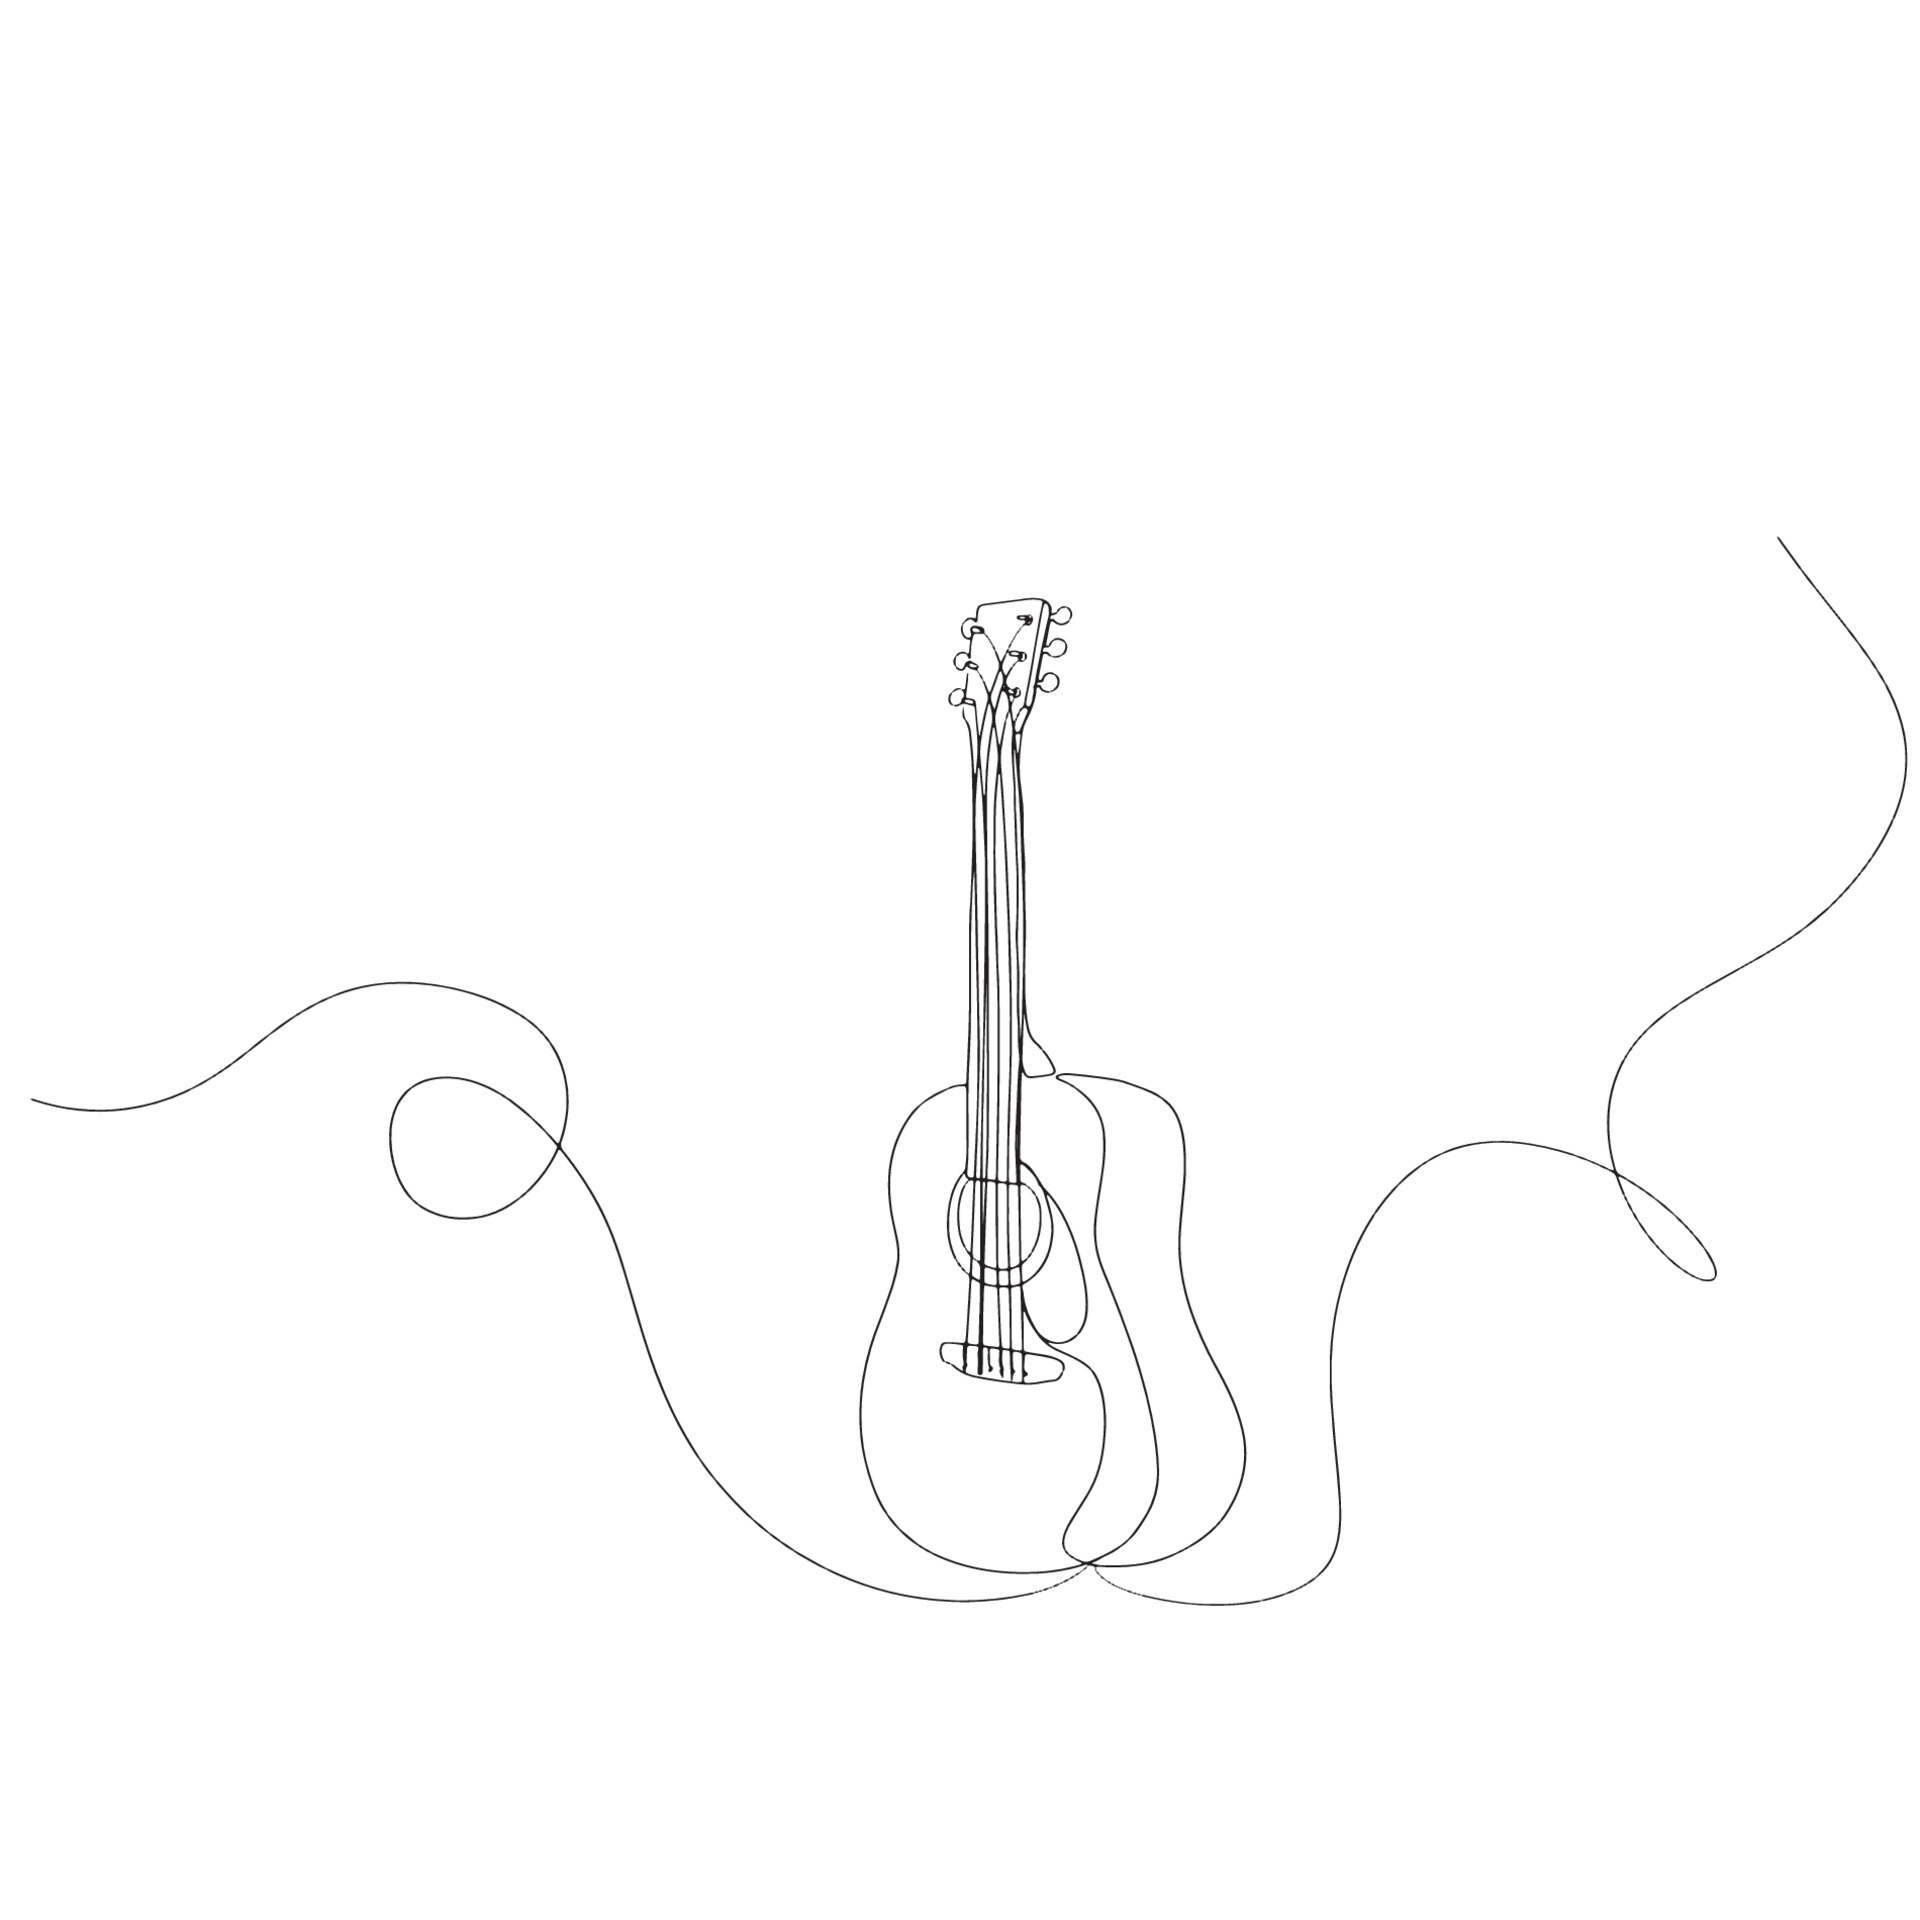 Guitar drawing Images - Search Images on Everypixel